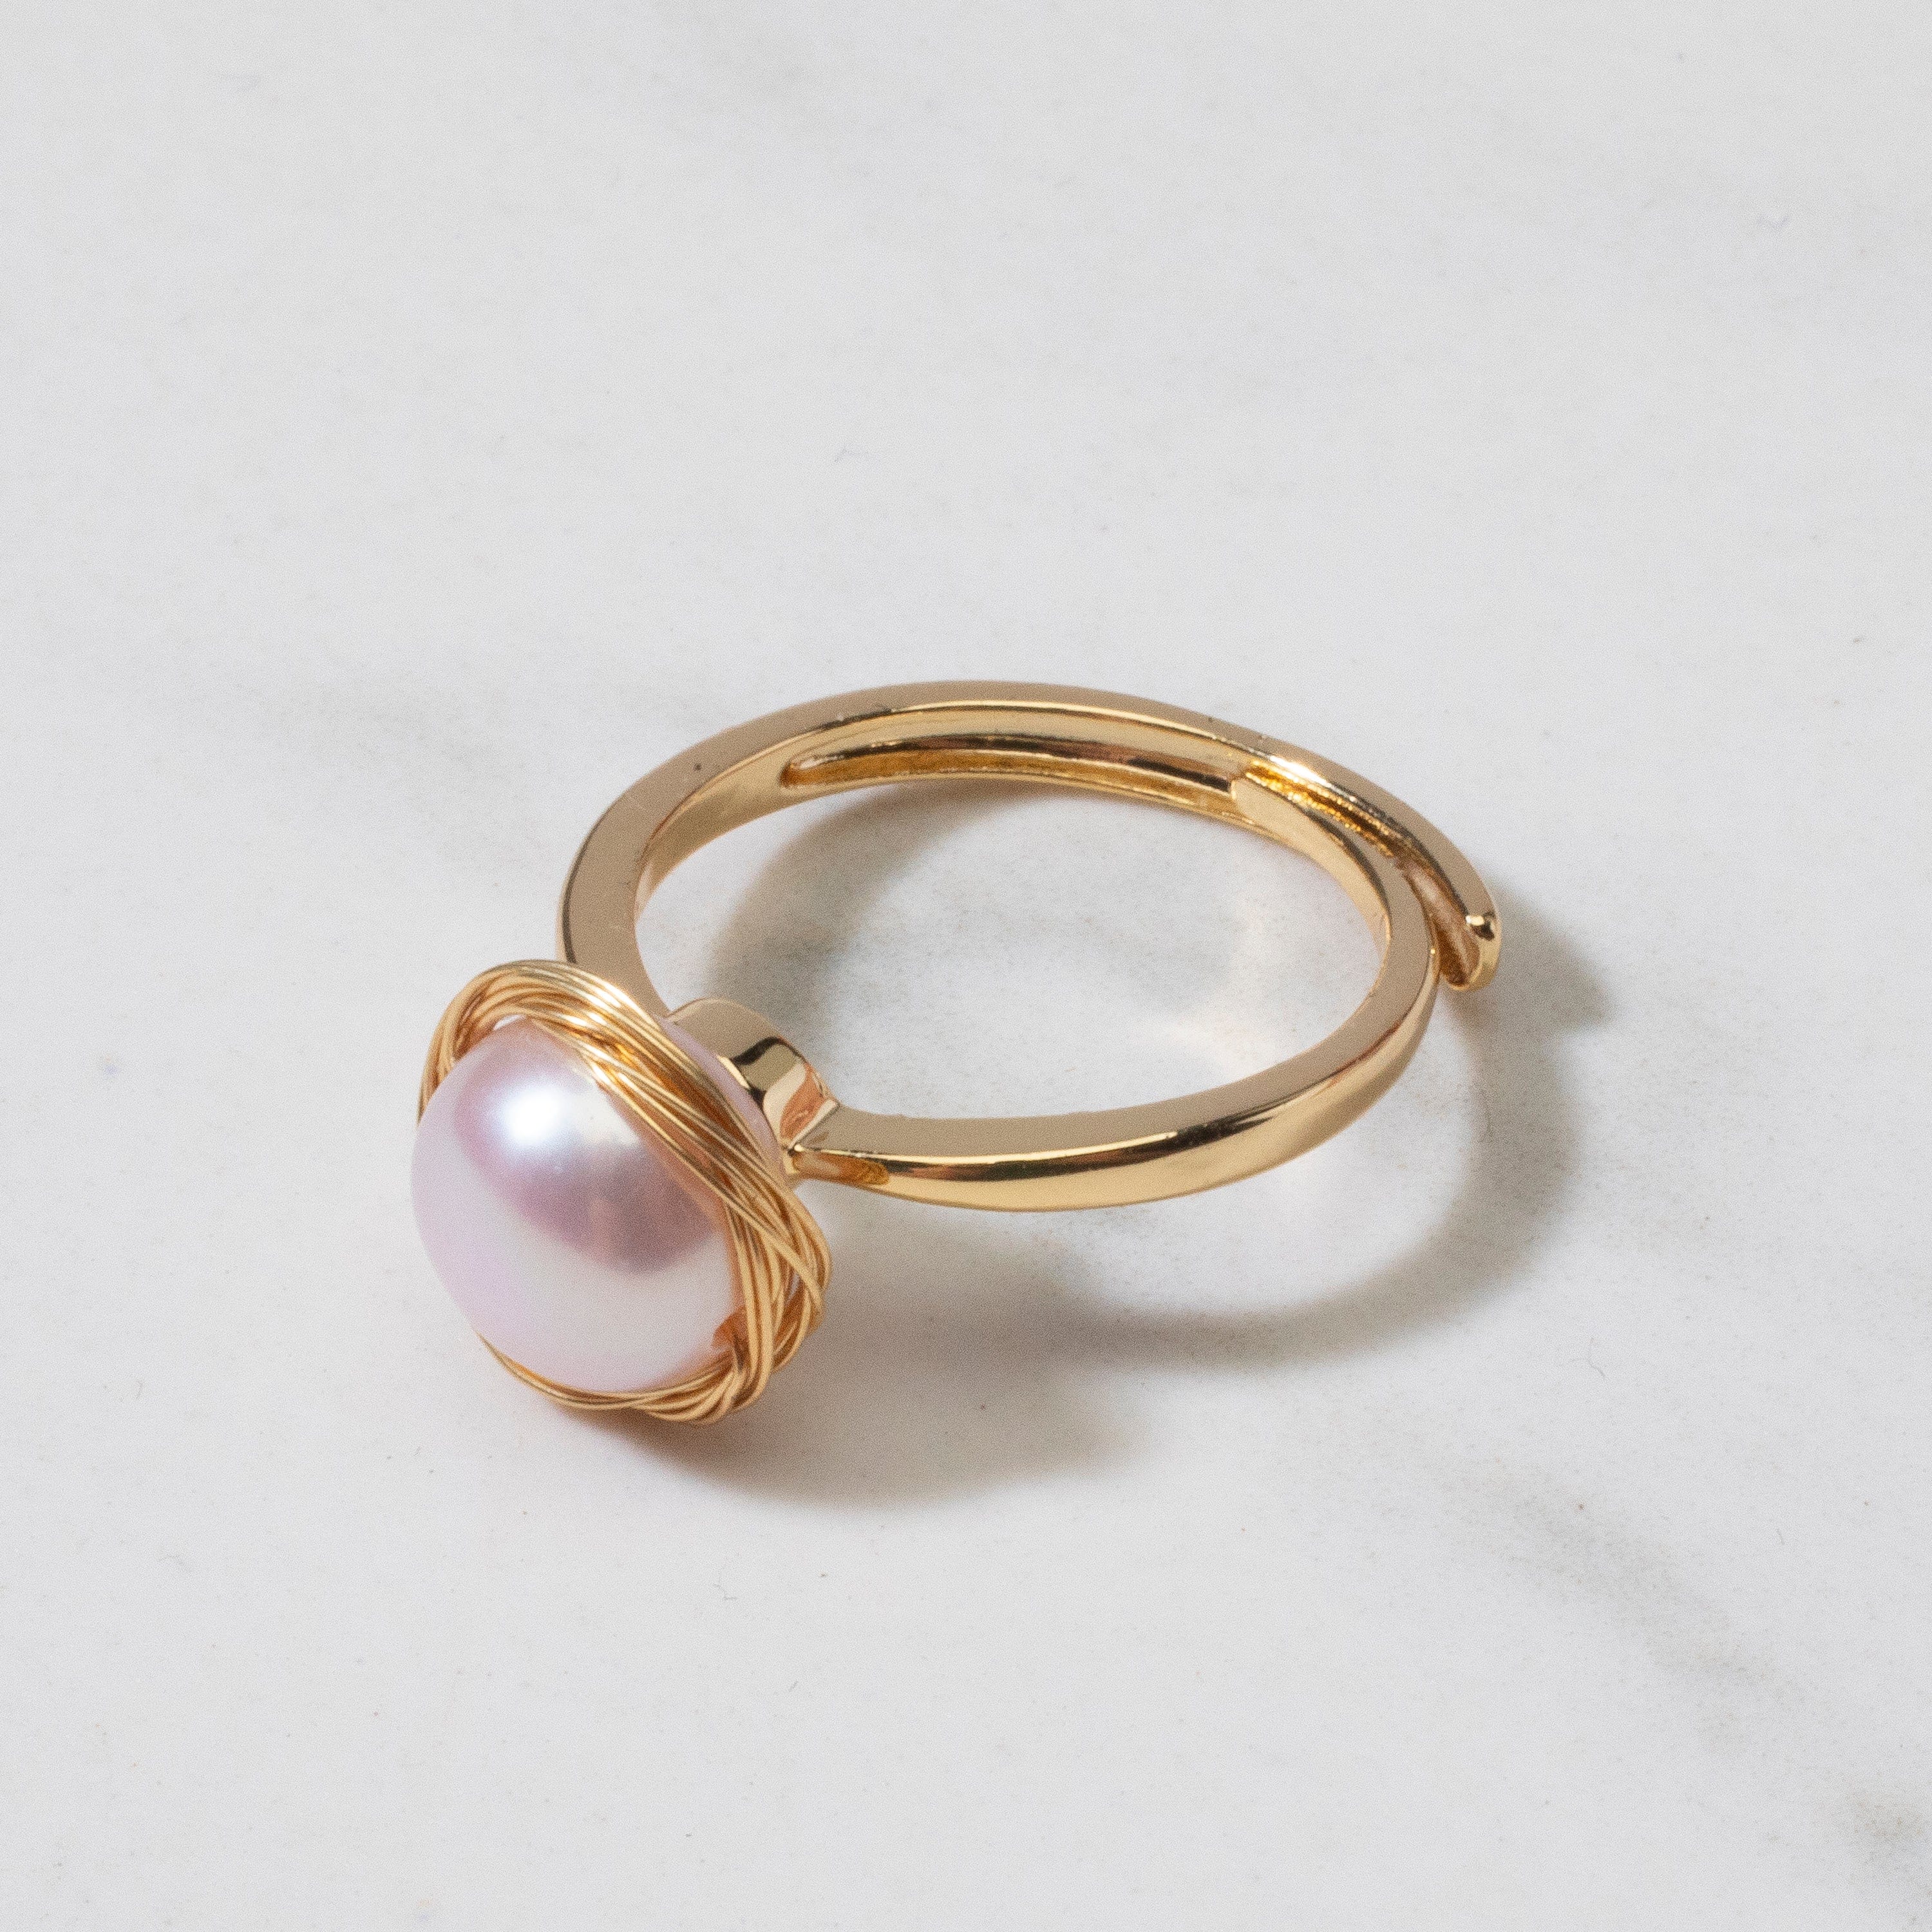 KALIFANO Gemstone Rings Fresh Water Pearl and Braided Brass Adjustable Ring - Lilac BPR-L